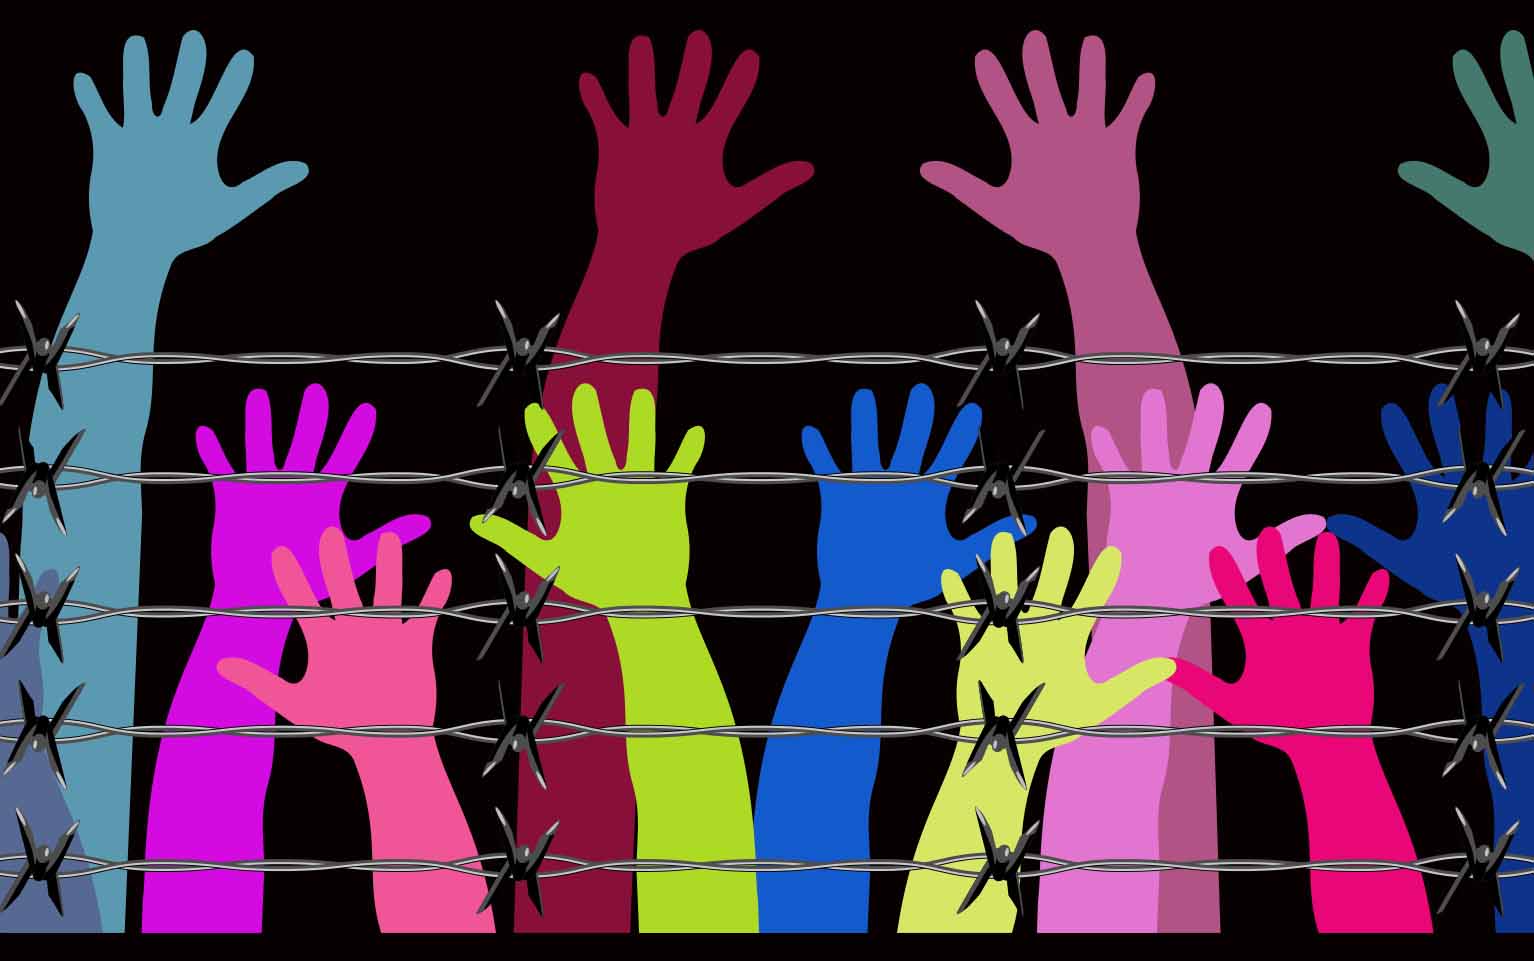 Raised hands in front of barbed wire (cropped) 1534 x 961 Pixabay.com